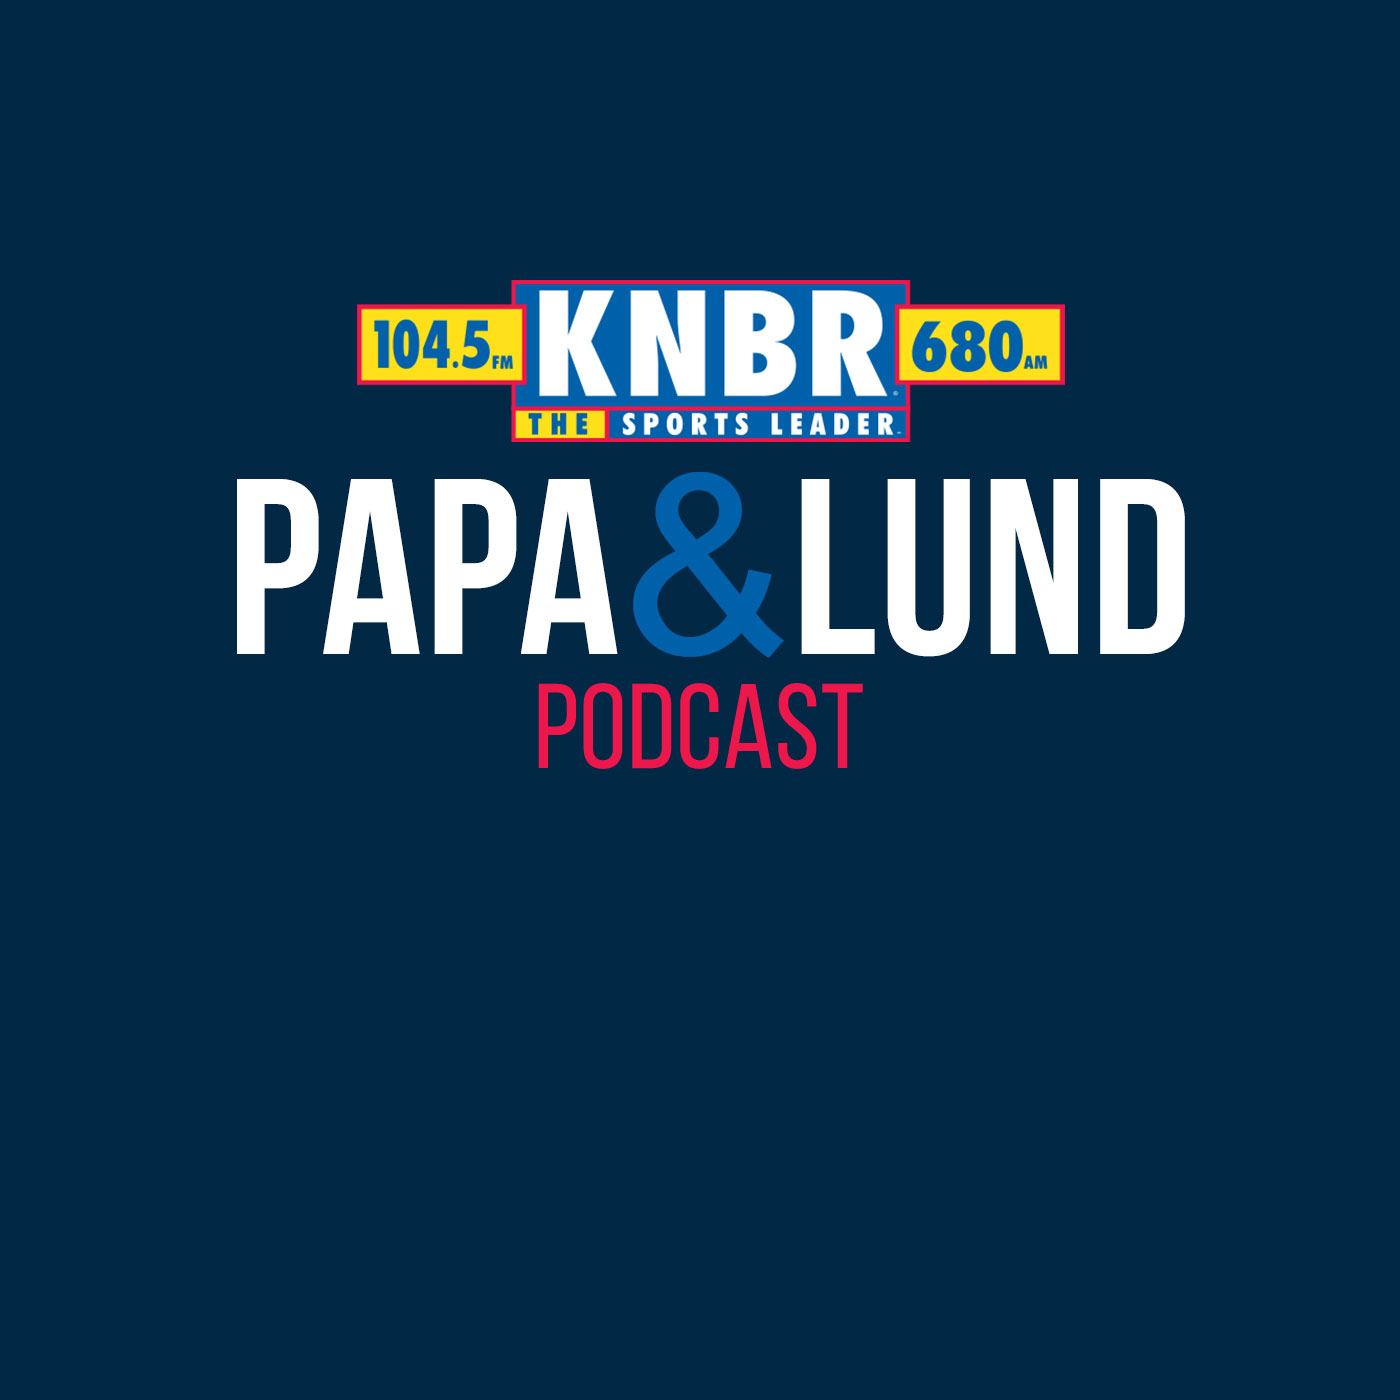 5-22 Joe Ritzo joins Papa & Lund to discuss the late inning collapse for the Giants including the lack of execution by the bullpen